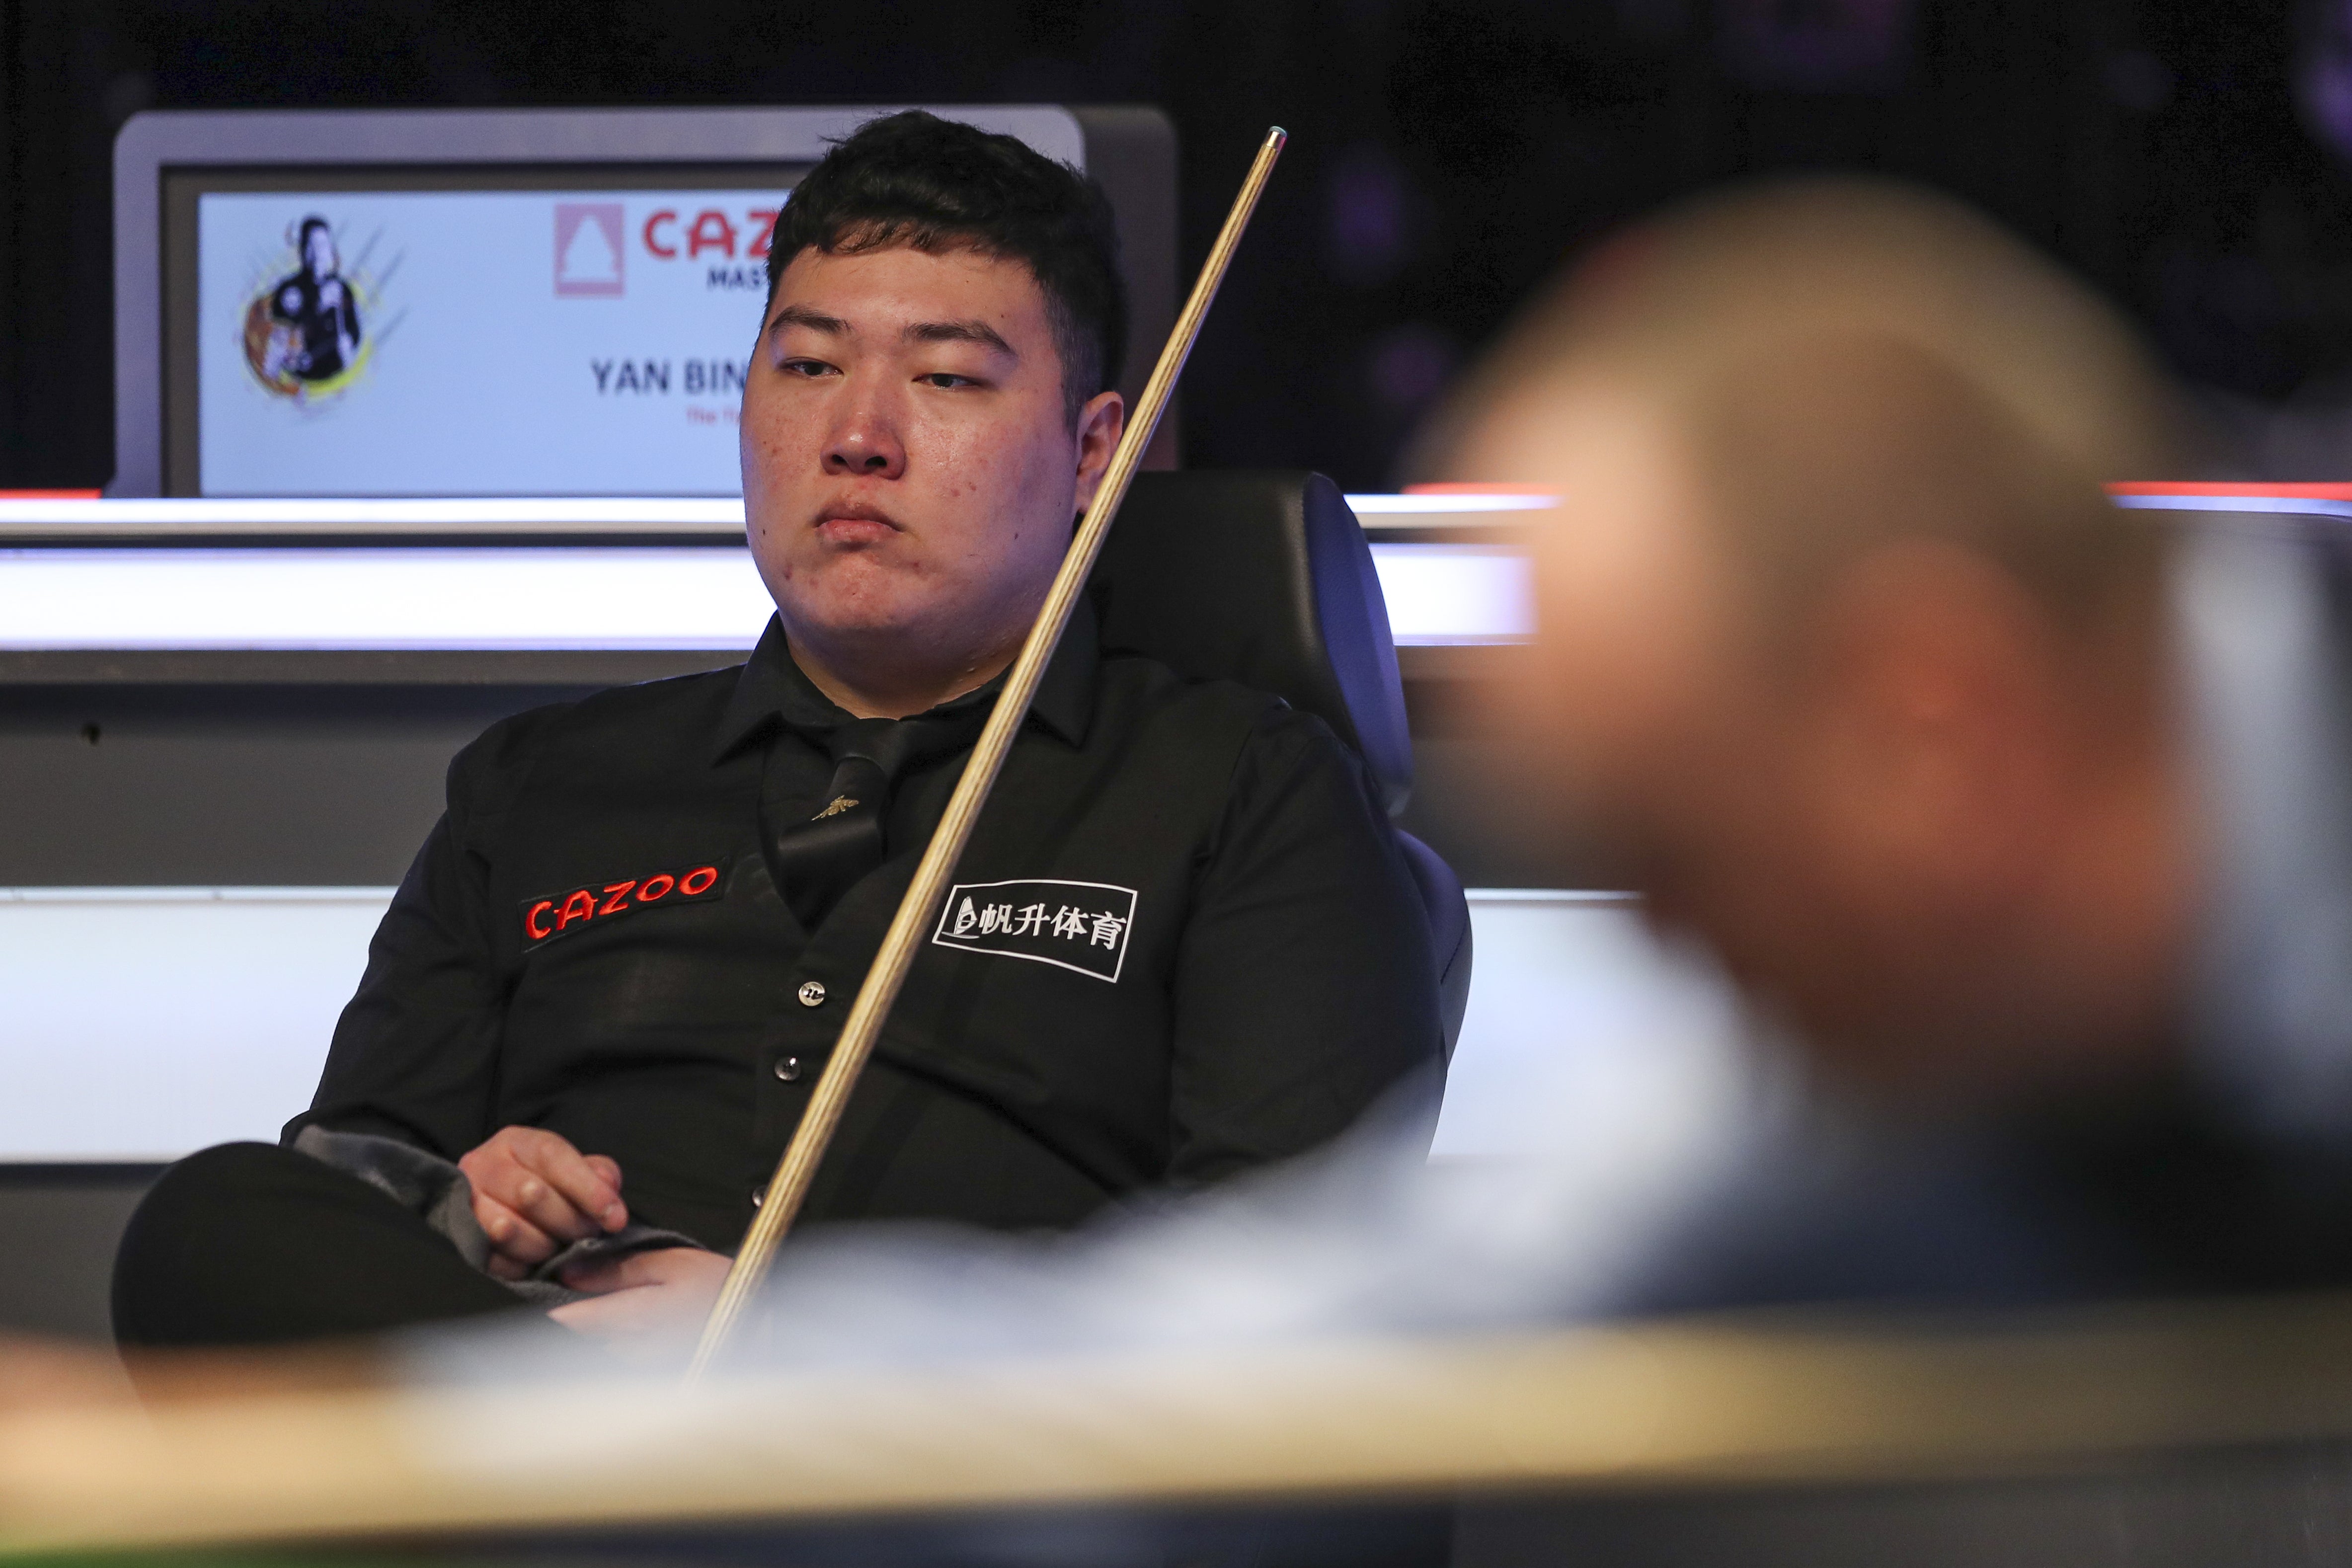 Yan Bingtao watches while Mark Williams plays a shot during day one of the 2022 Cazoo Masters at Alexandra Palace (Kieran Cleeves/PA)